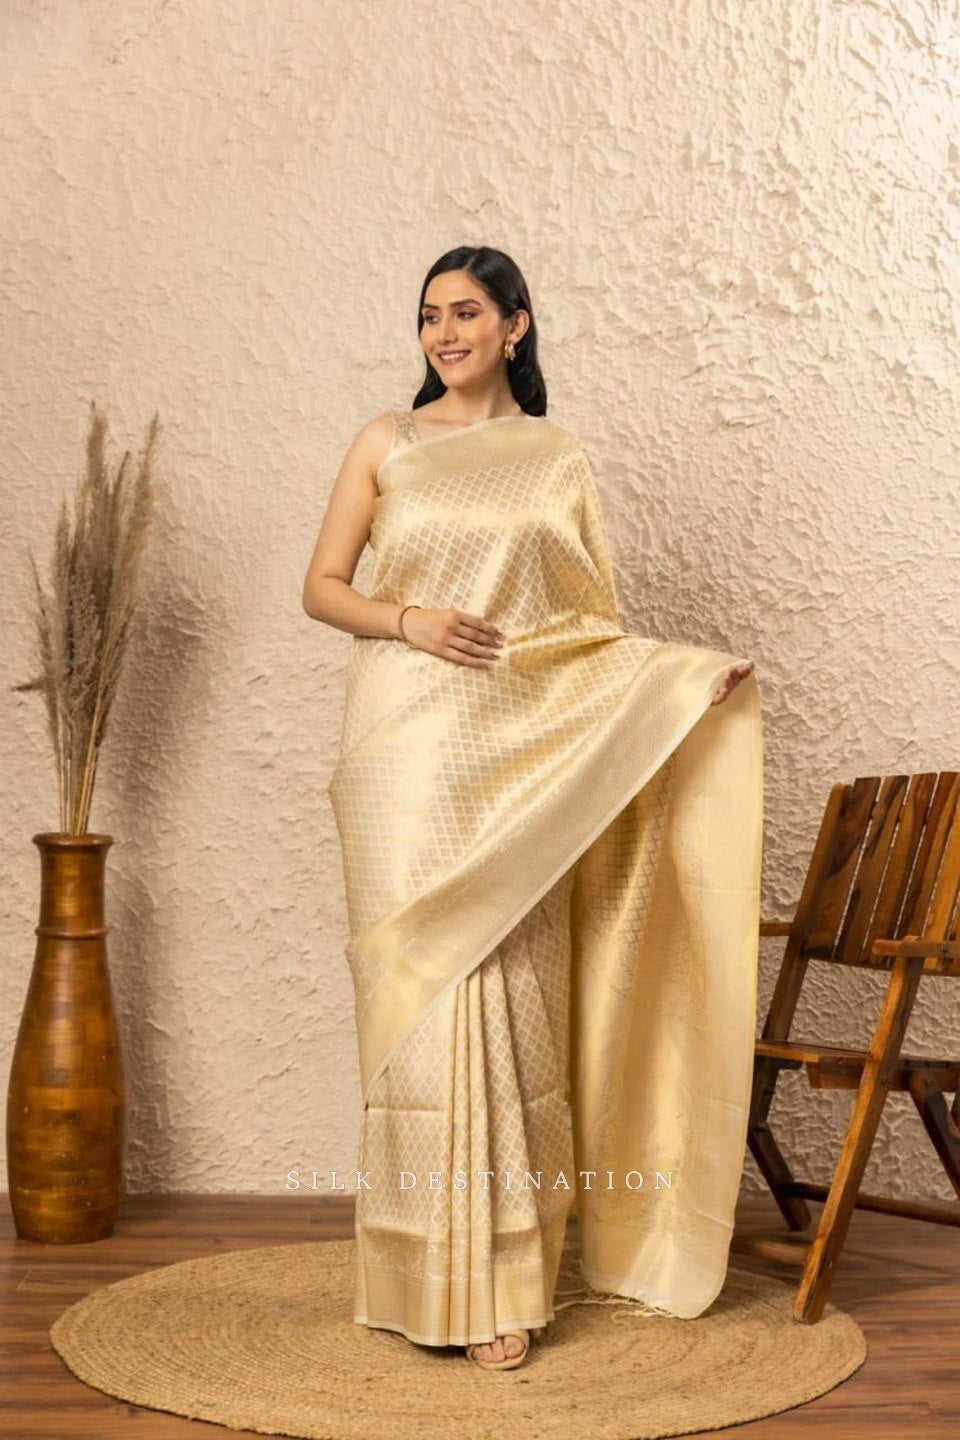 Sunlit Splendor: Saree in Creamy Gold, Framed with Honeyed Border with Febric threat